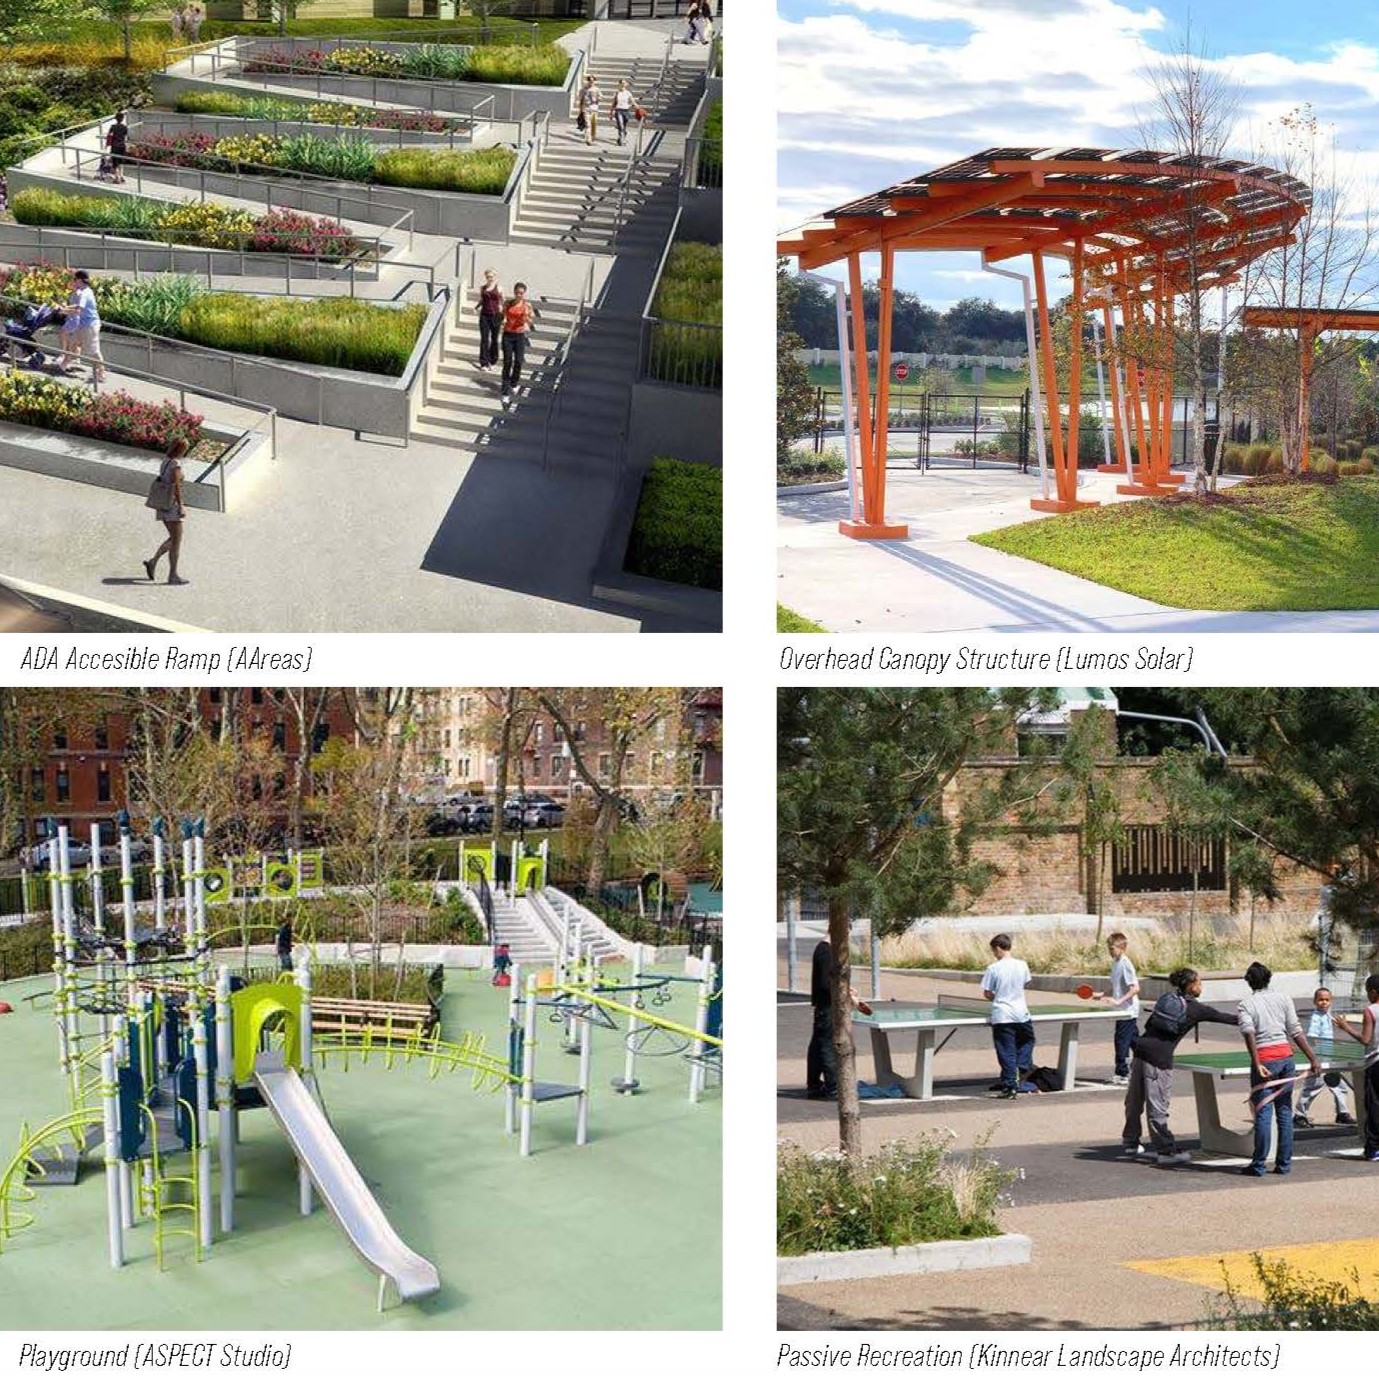 4 photos: accessible ramp with gardens, overhead canopy, playground, ping pong tables